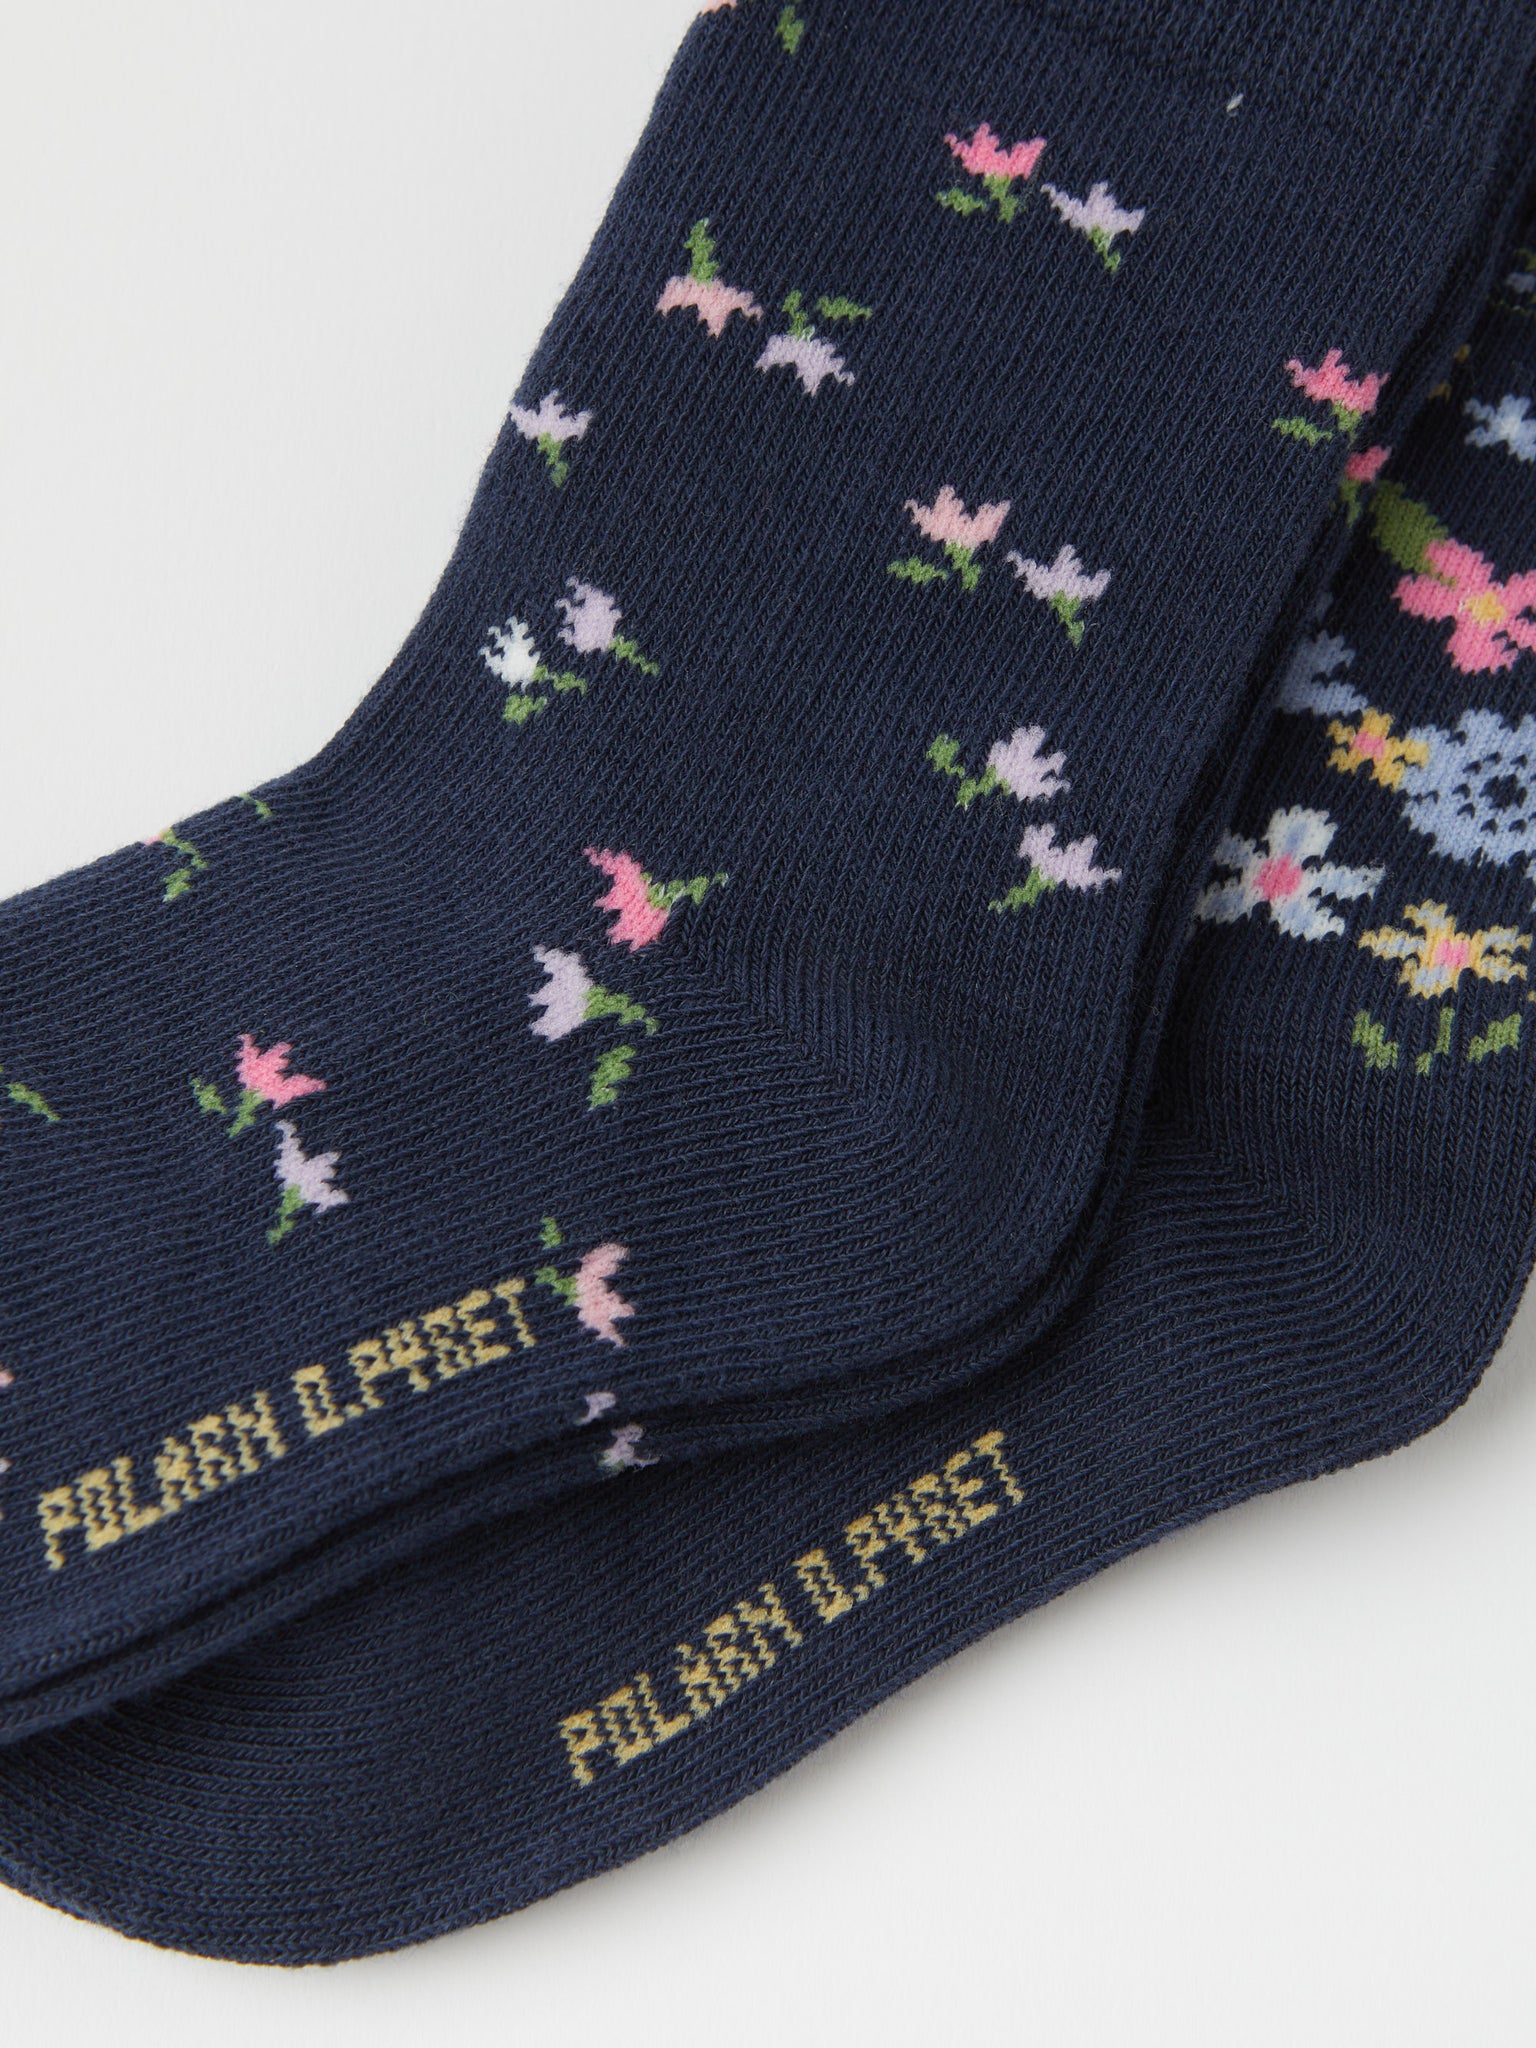 Two Pack Floral Kids Socks from the Polarn O. Pyret kidswear collection. Ethically produced kids clothing.